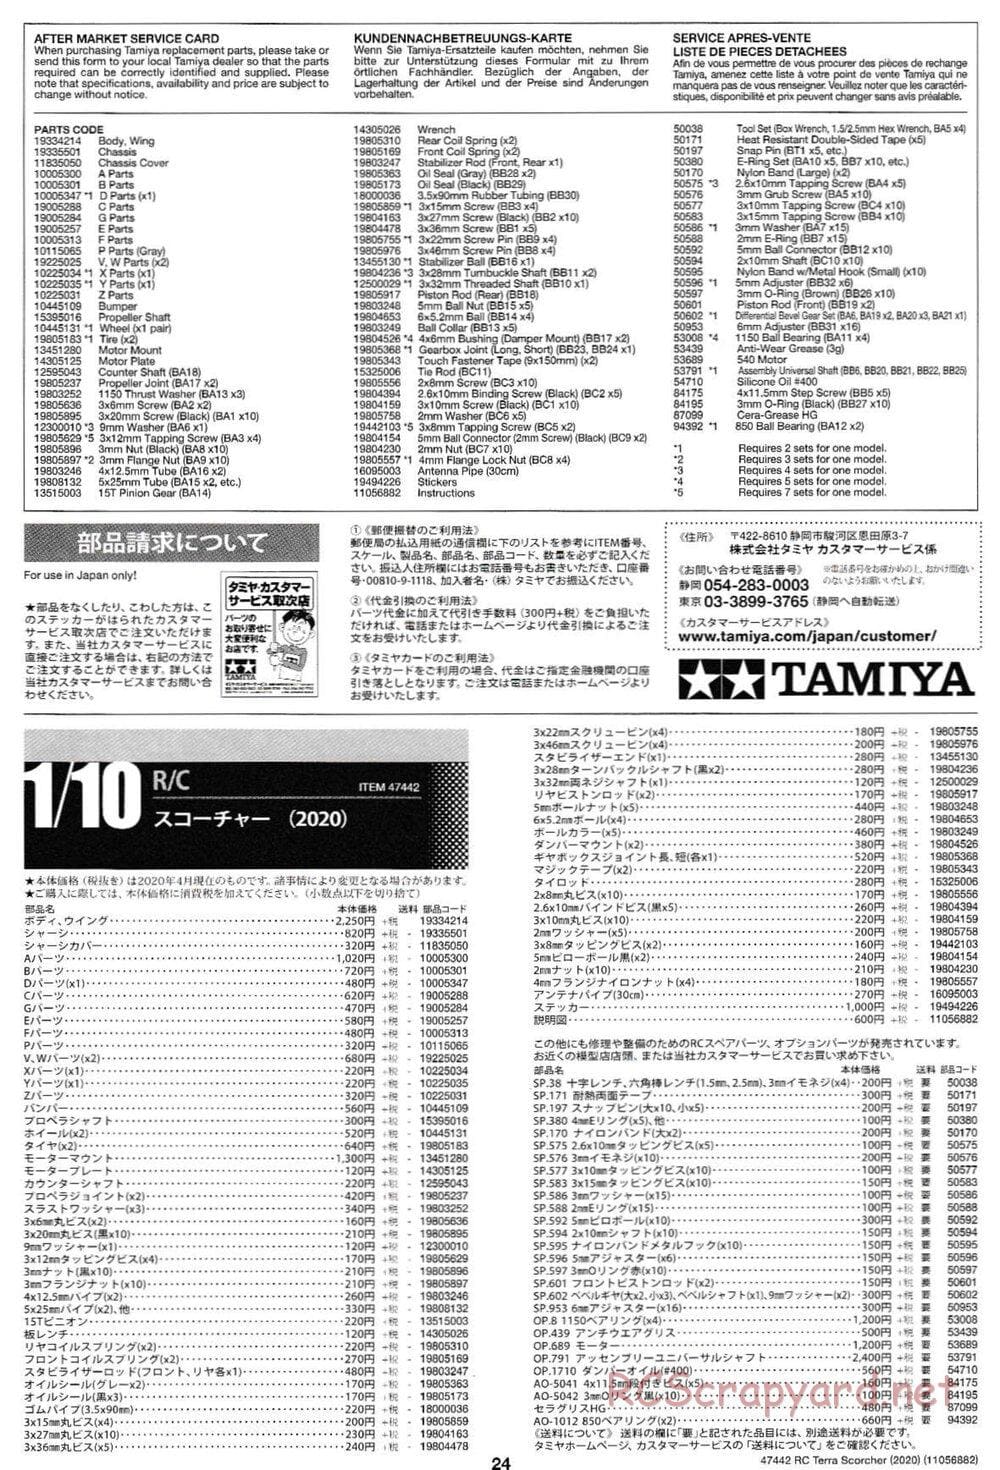 Tamiya - Terra Scorcher 2020 Chassis - Manual - Page 24